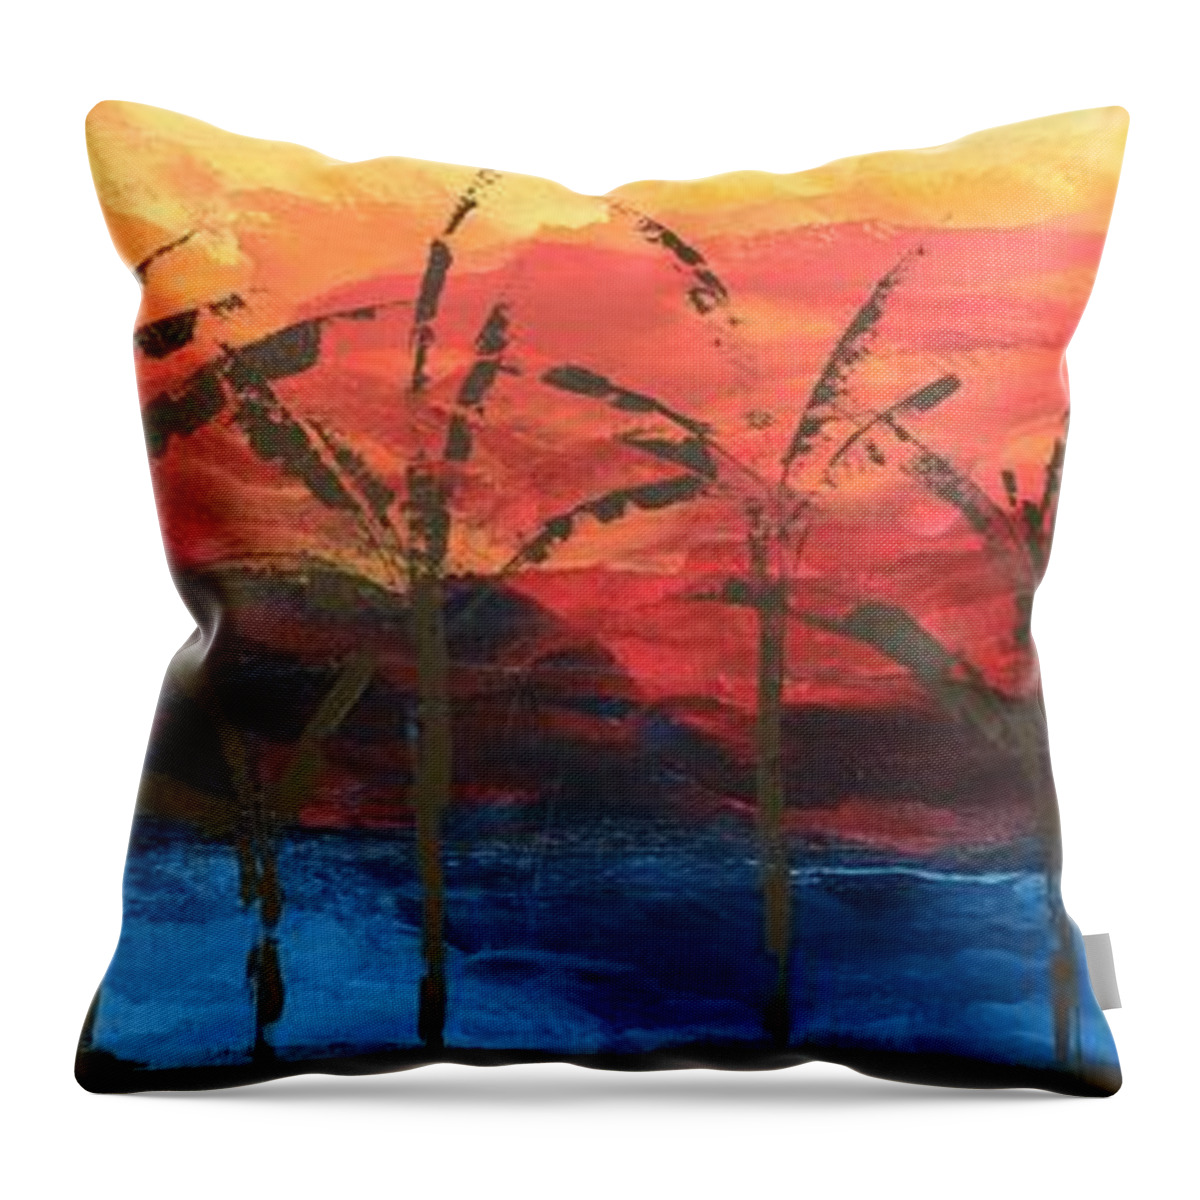 Sunset Beach Throw Pillow featuring the painting Sunset Beach by Linda Bailey